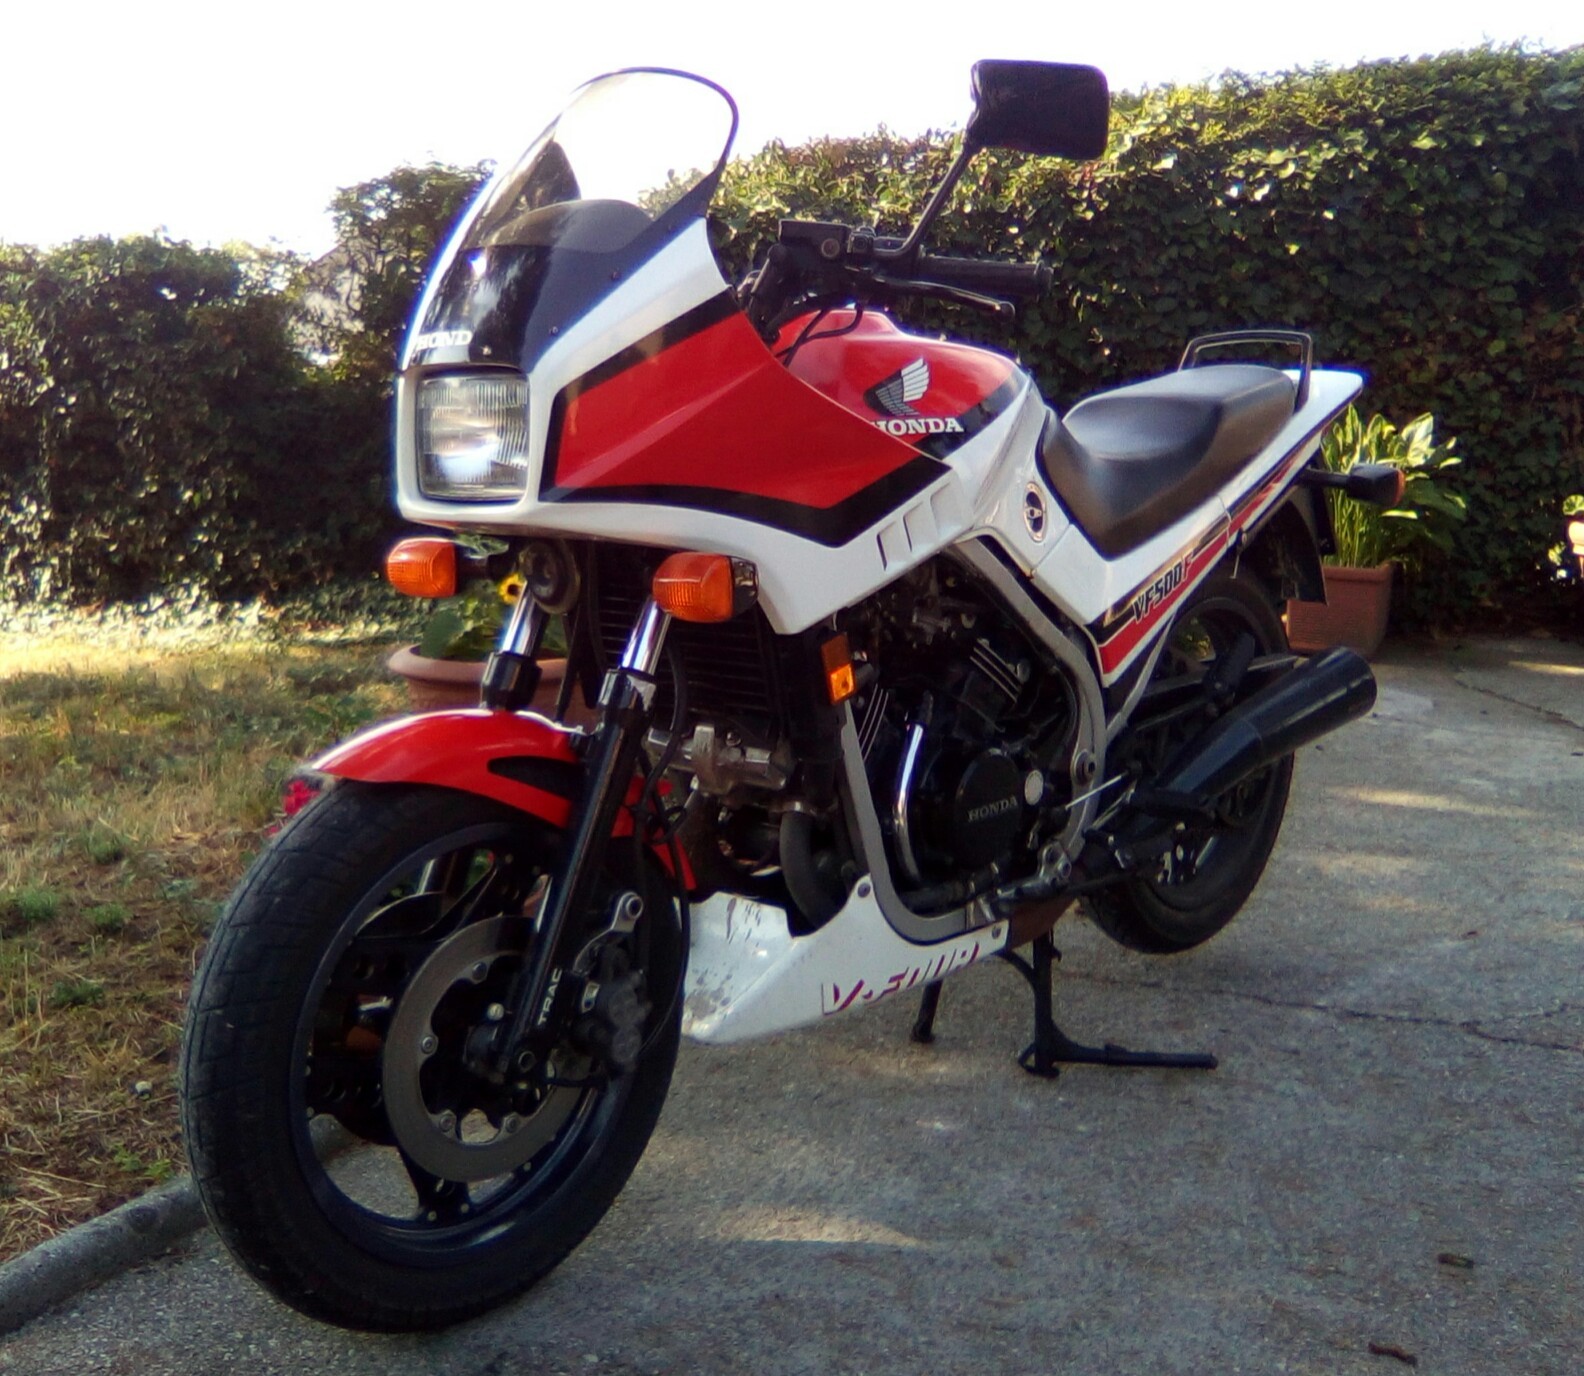 Honda VF 500 F 1985 from Paolo Belli